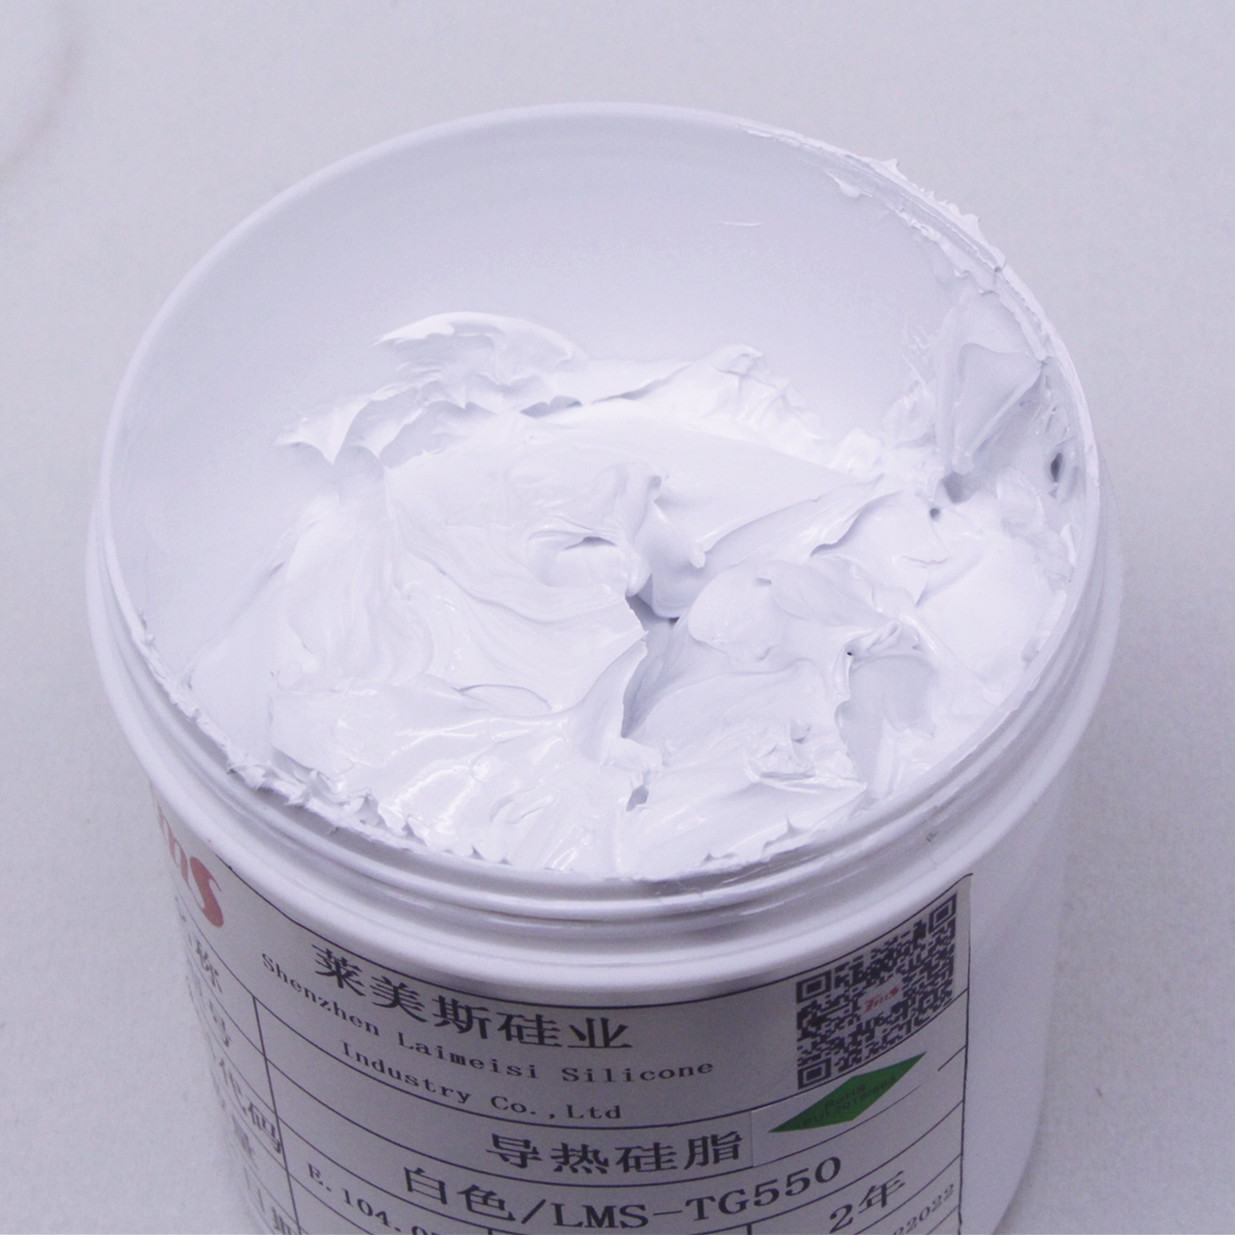 1kg Compound Thermal Grease For Memory Storage Module